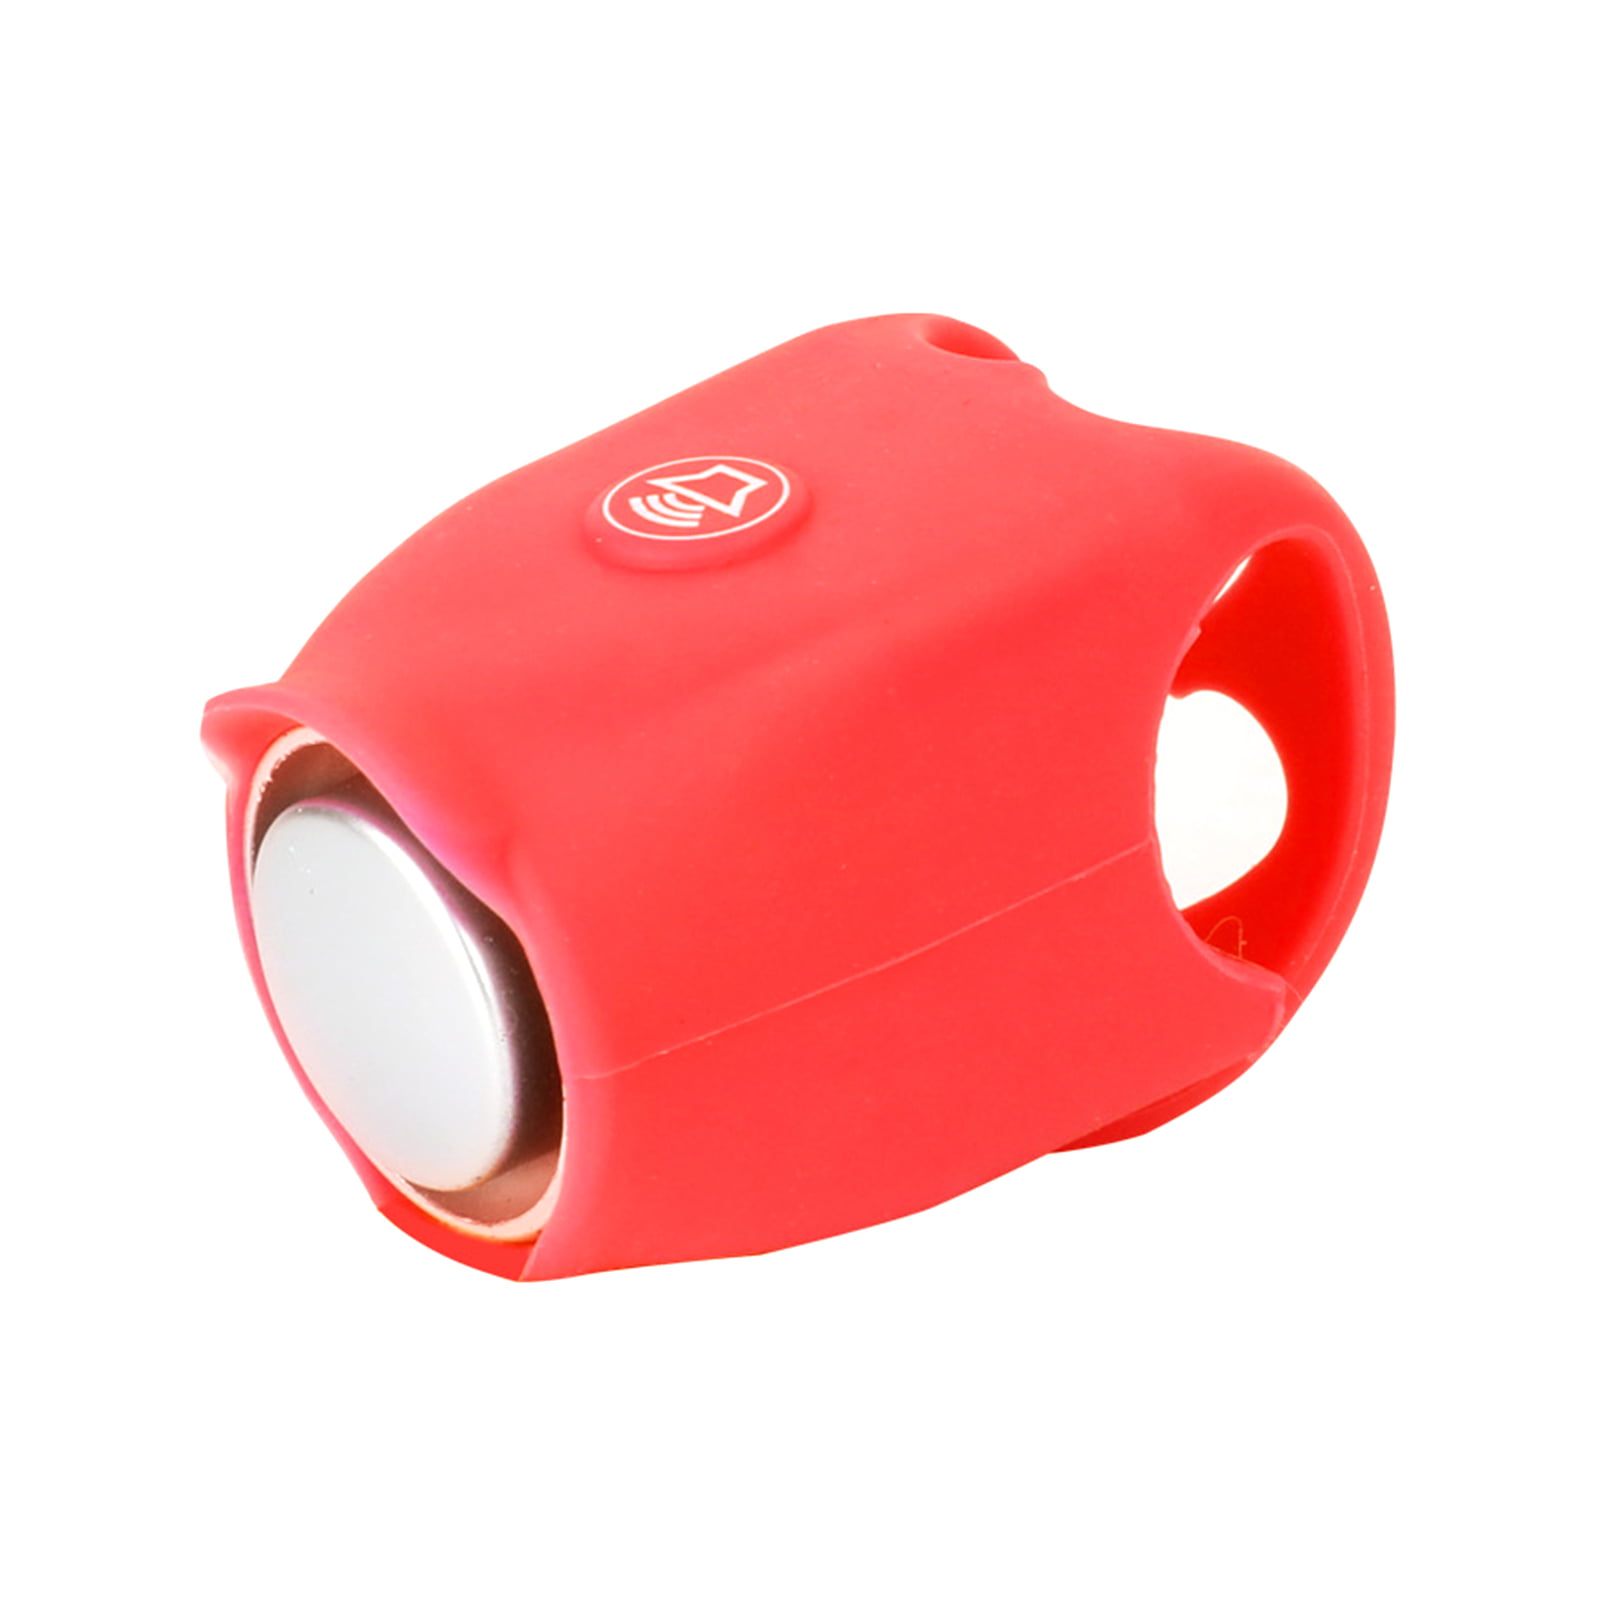 Bicycle Air Horn Bike Bell Safety Road Cycling Children Bike Handlebar Bell XE 